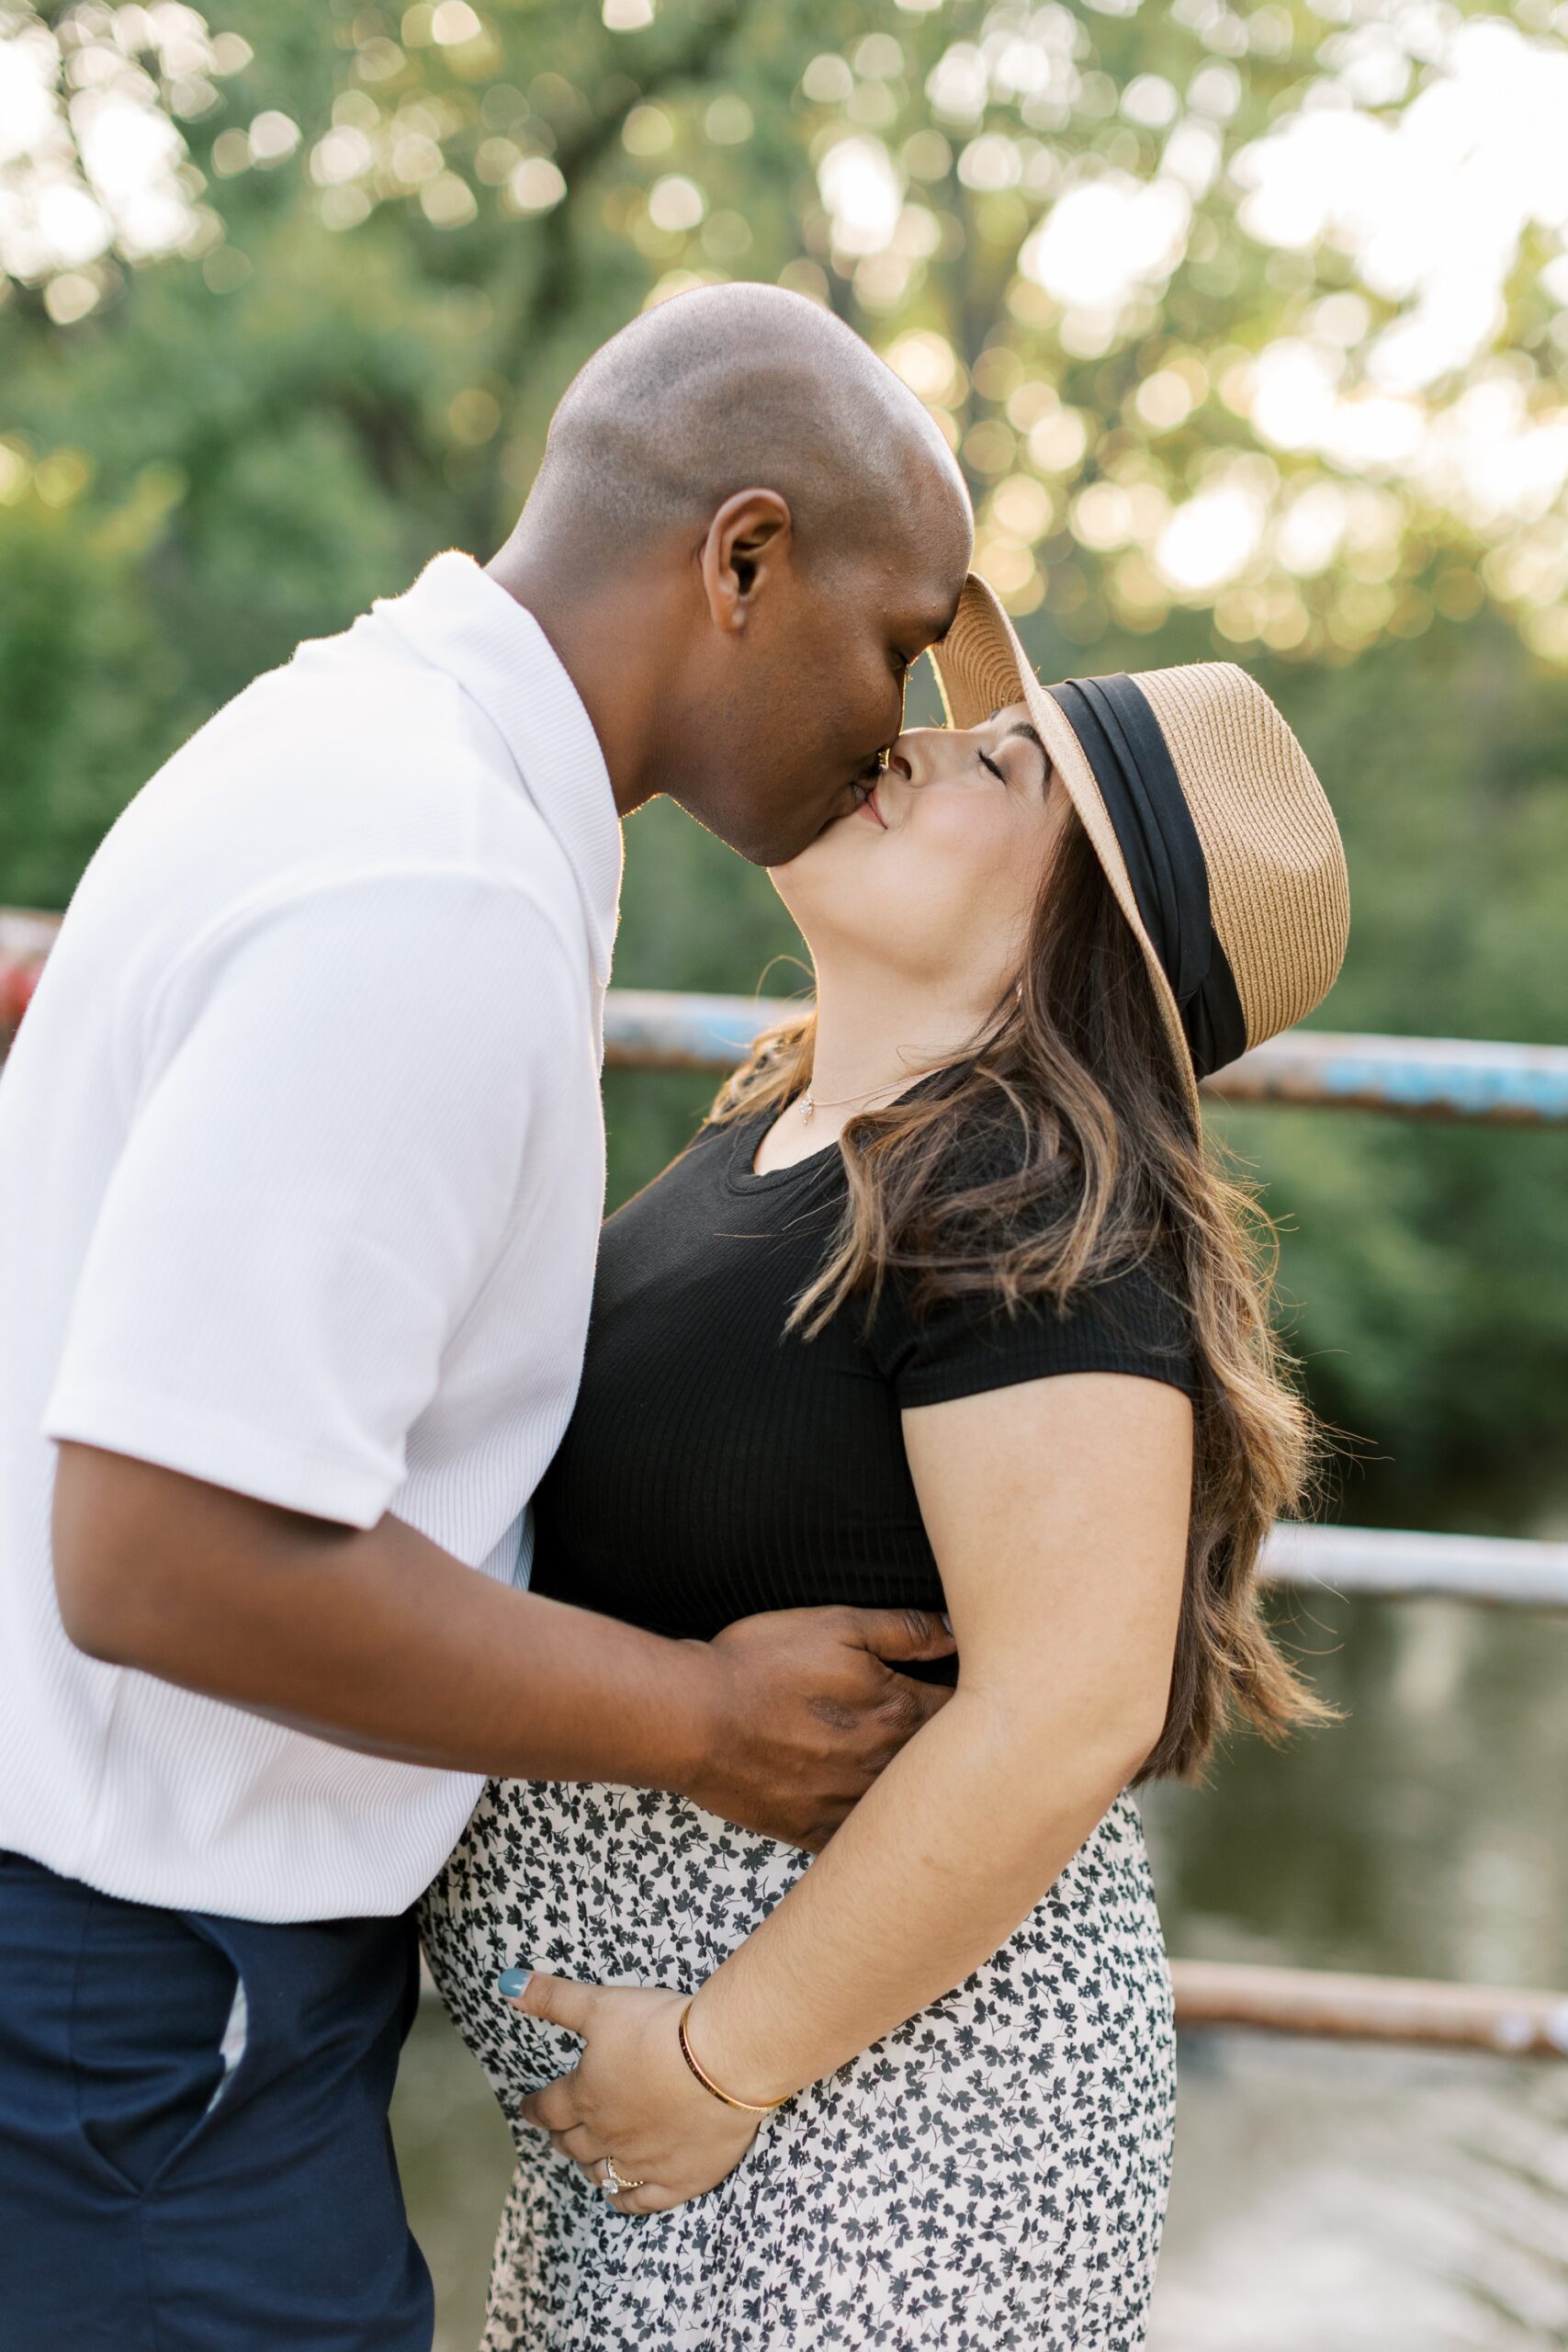 Man and woman kiss during Chicago summer outdoor maternity photos